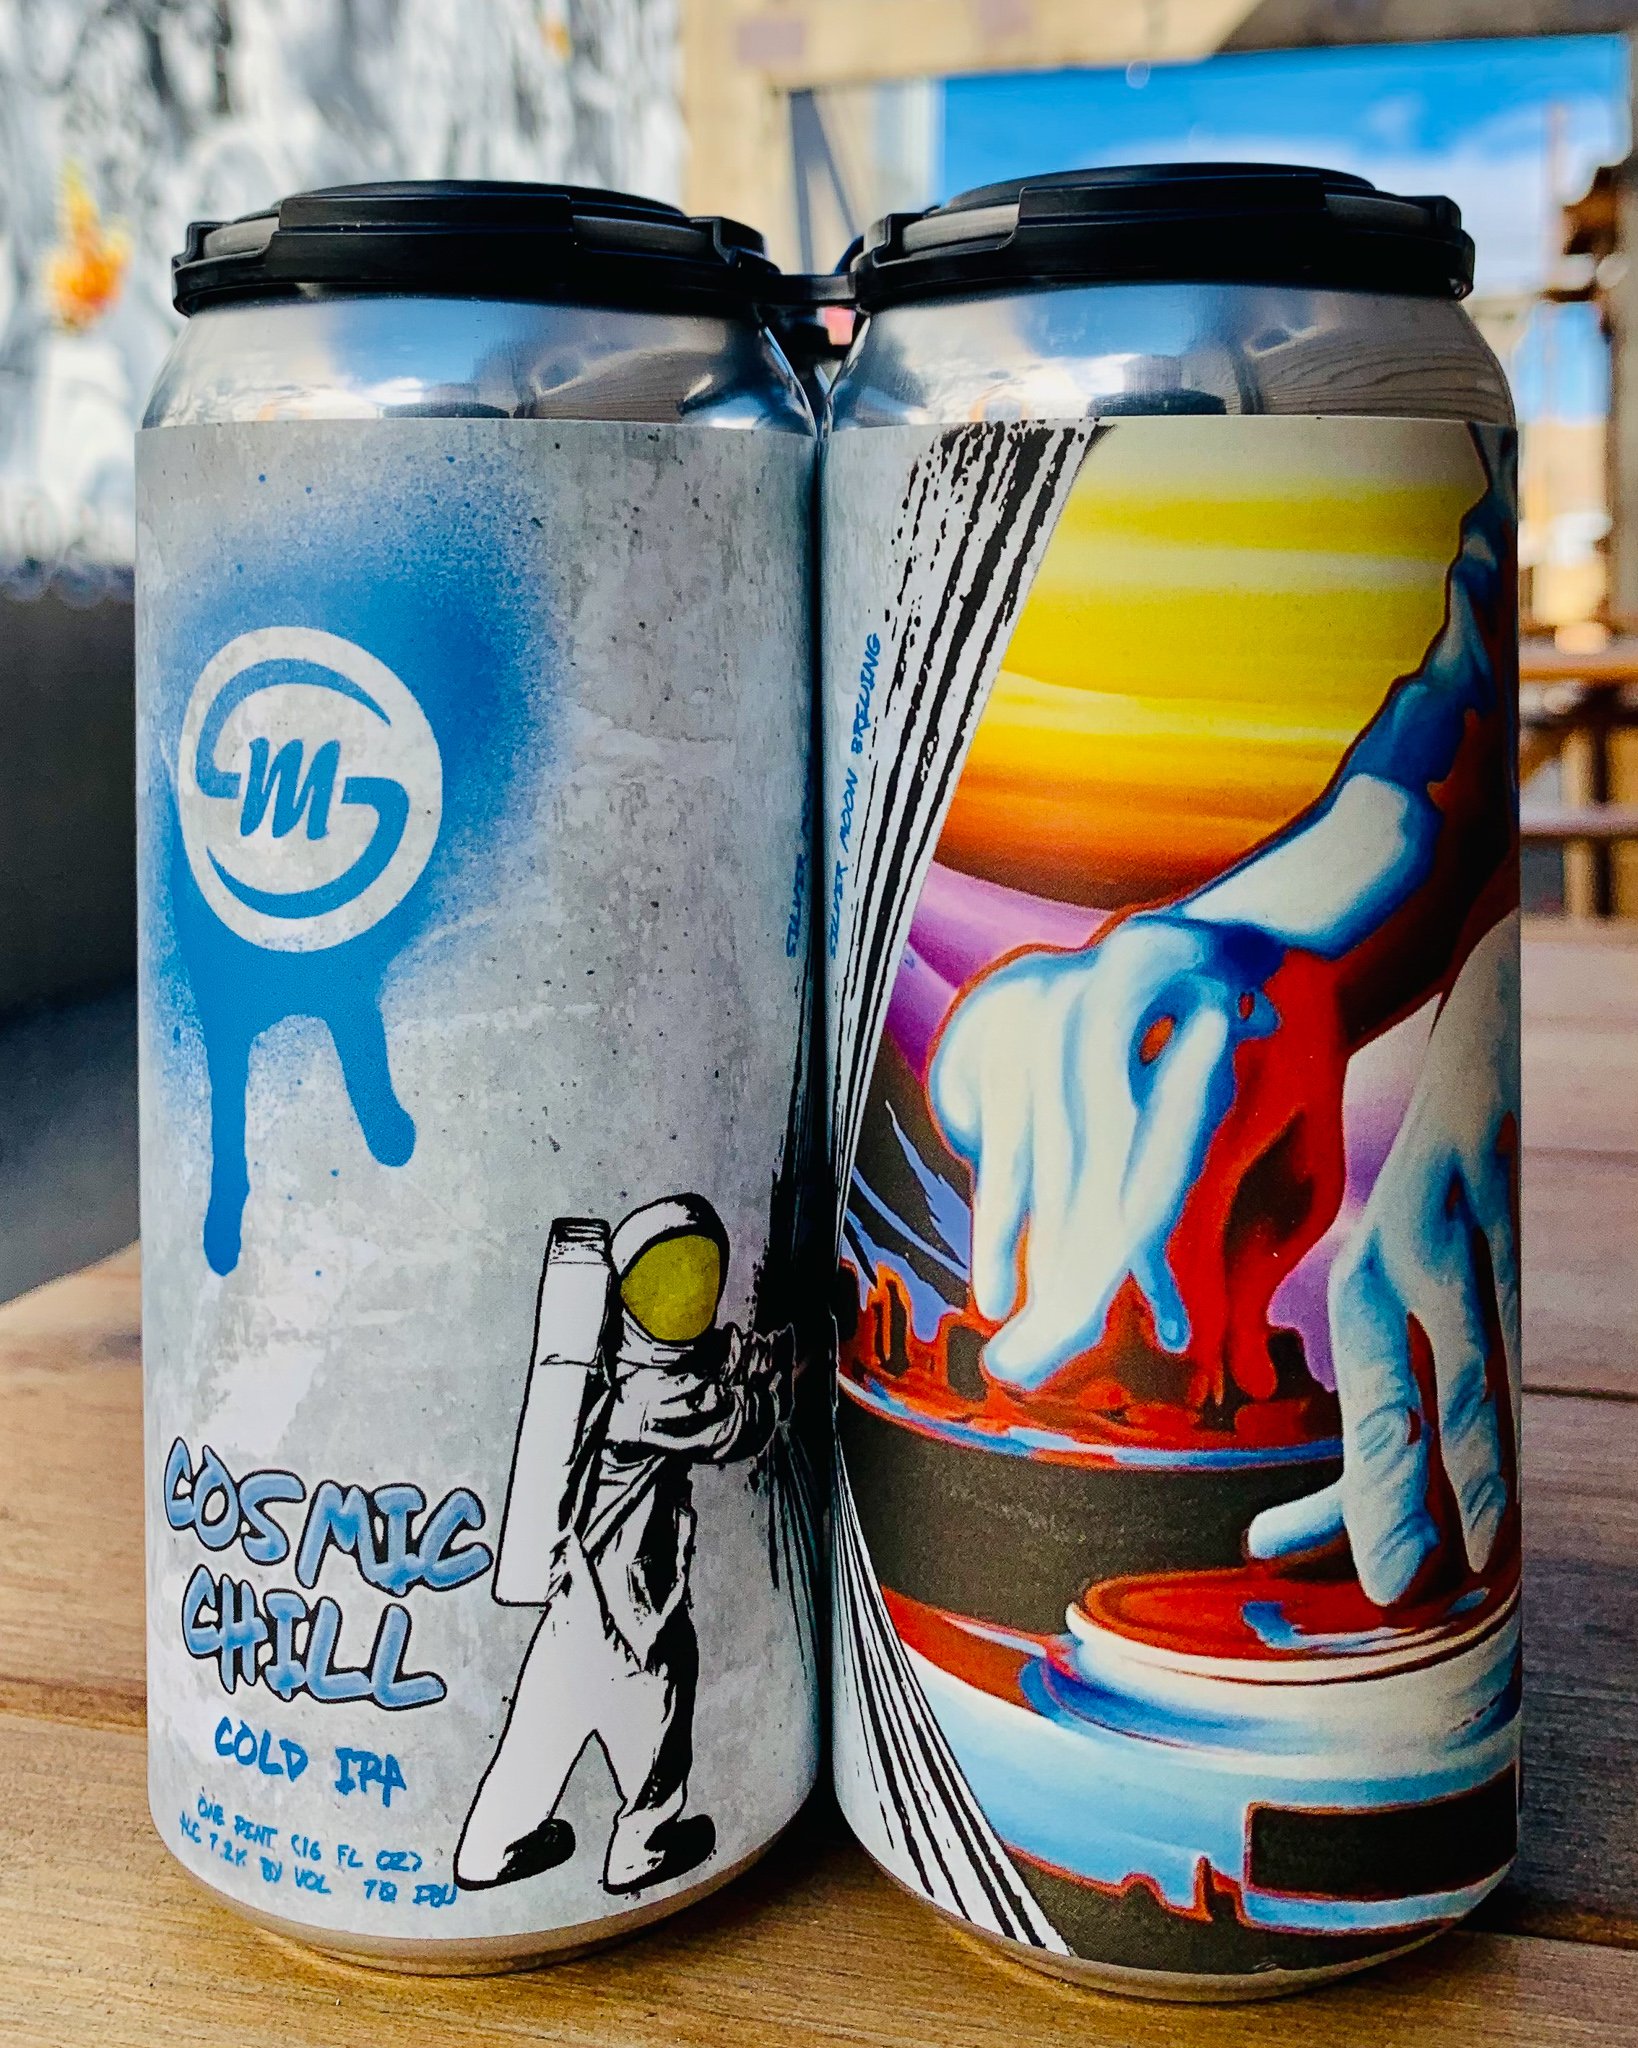 Two tall beer cans of silver moon cosmic chill feature spray painted bright colored art including a man in space suit